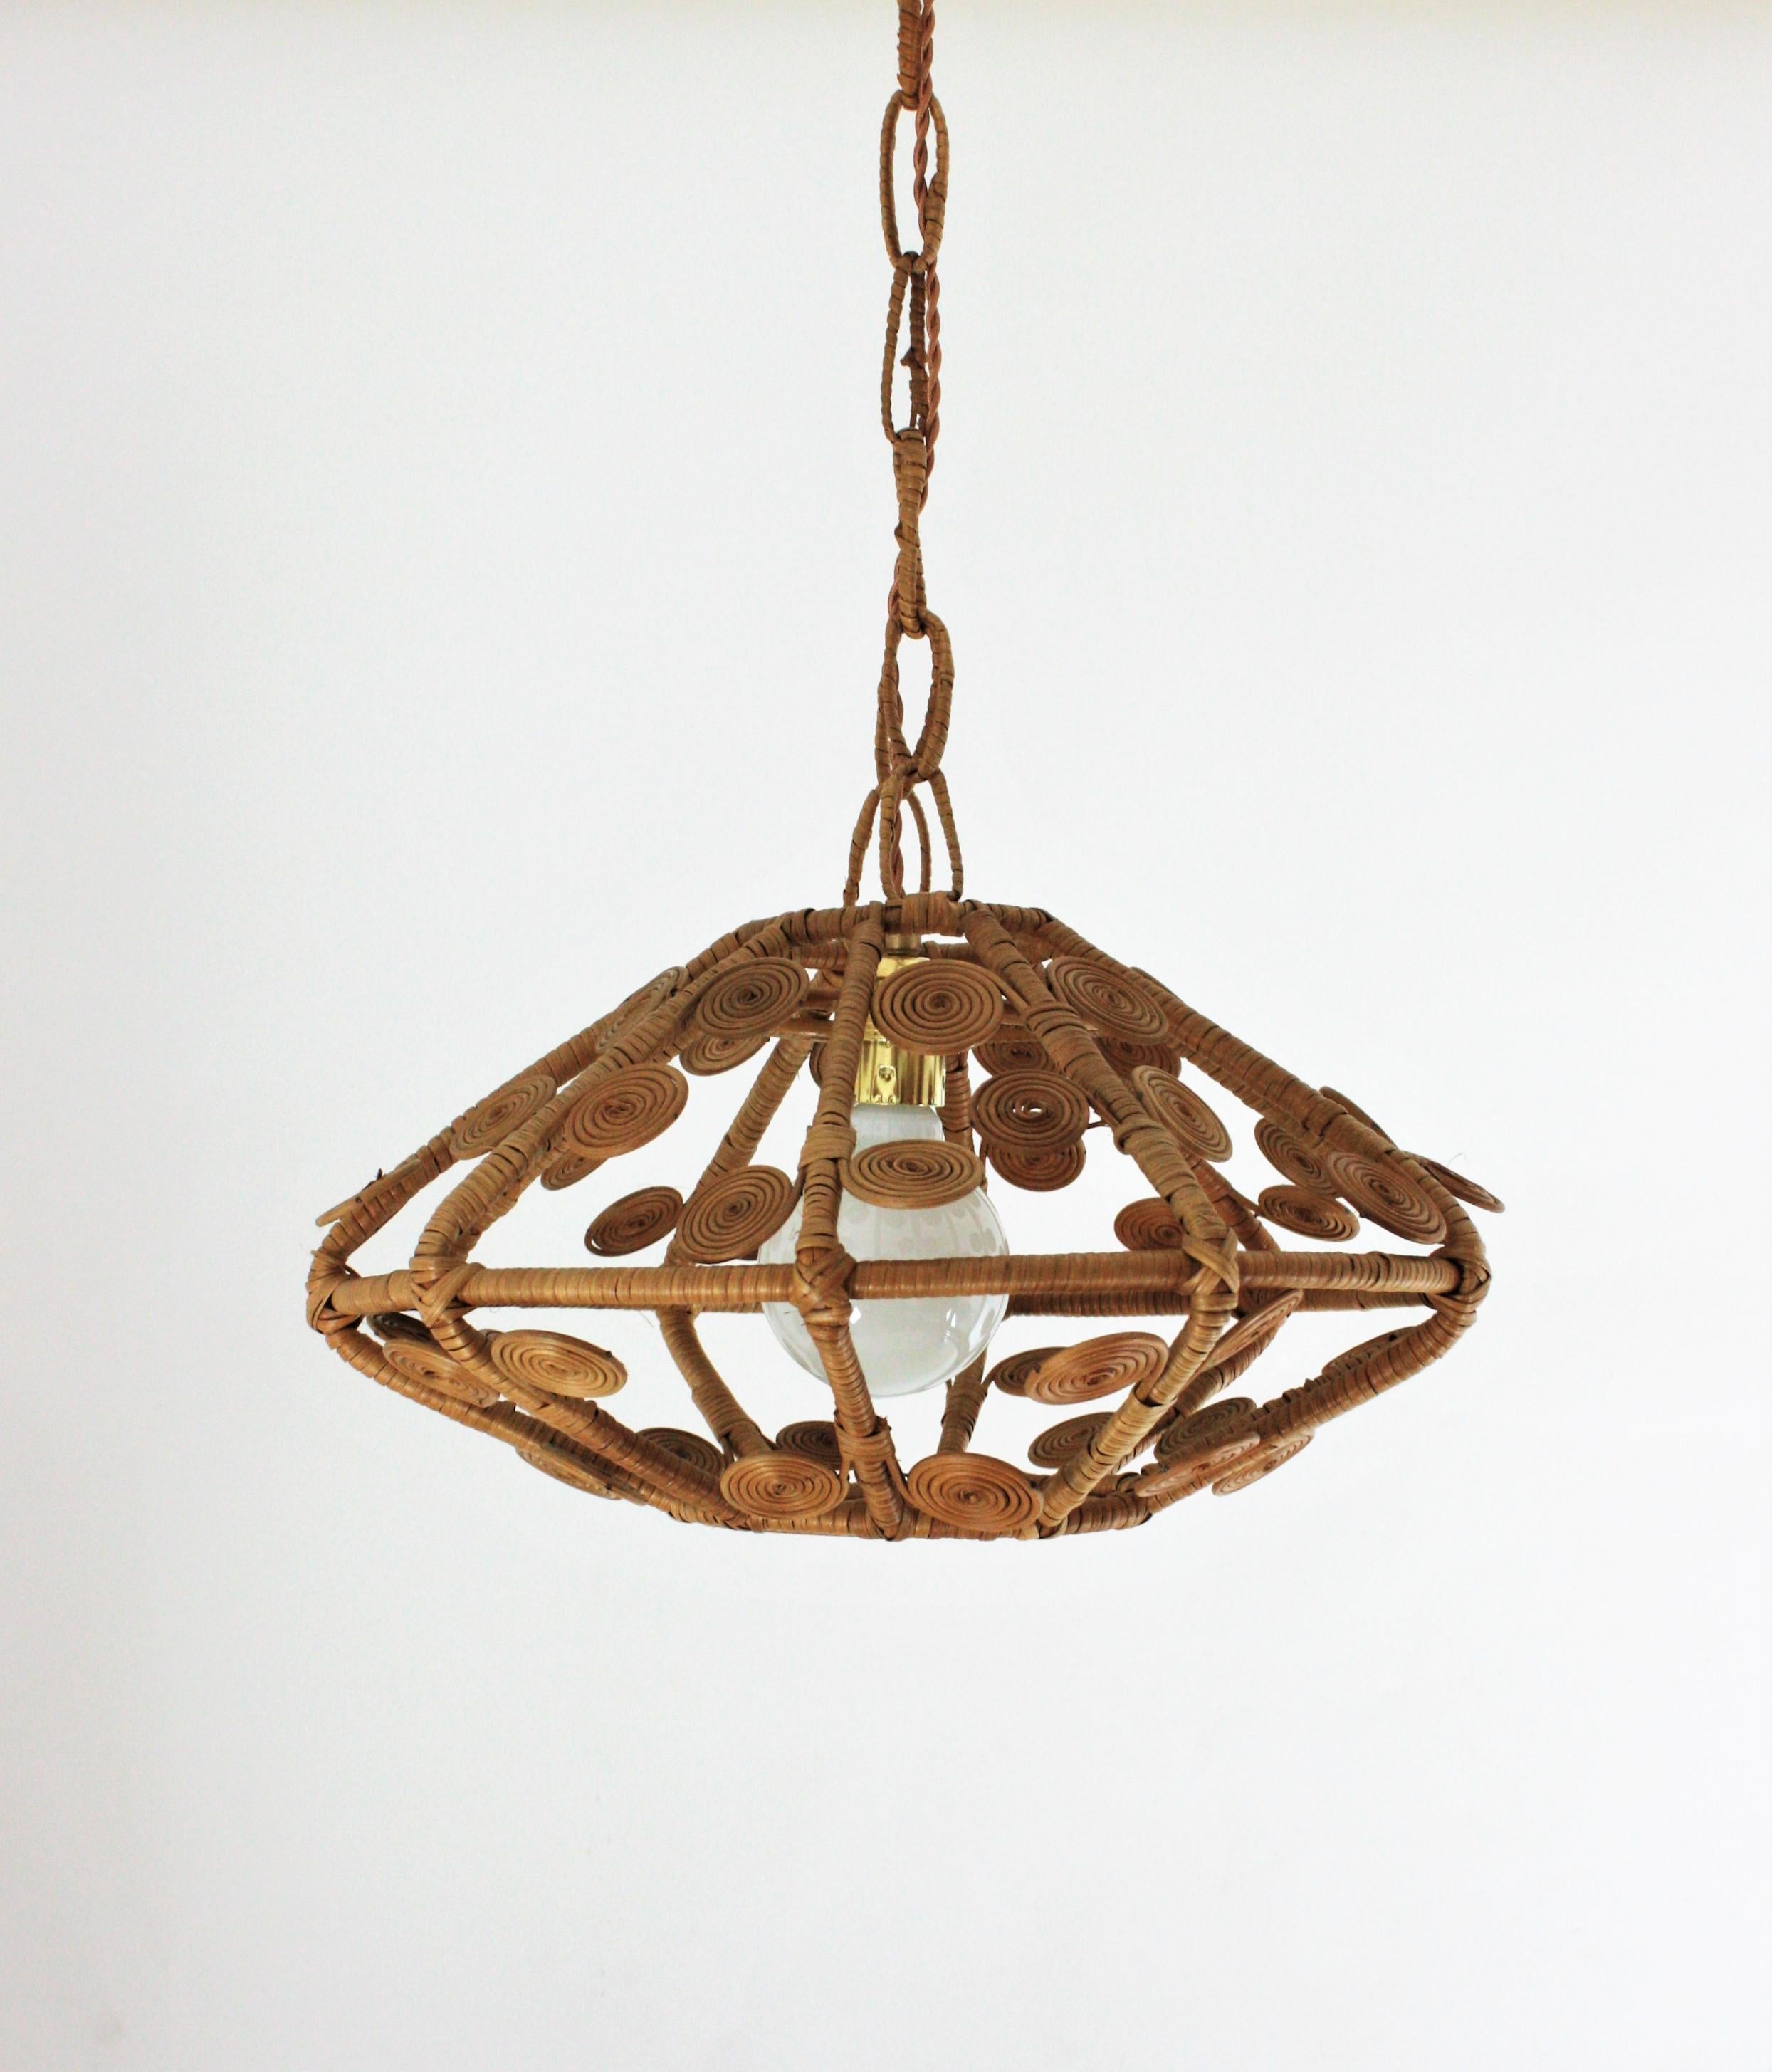 Hand-Crafted Spanish Modern Rattan Wicker Pendant Hanging Lamp with Filigree Details, 1960s